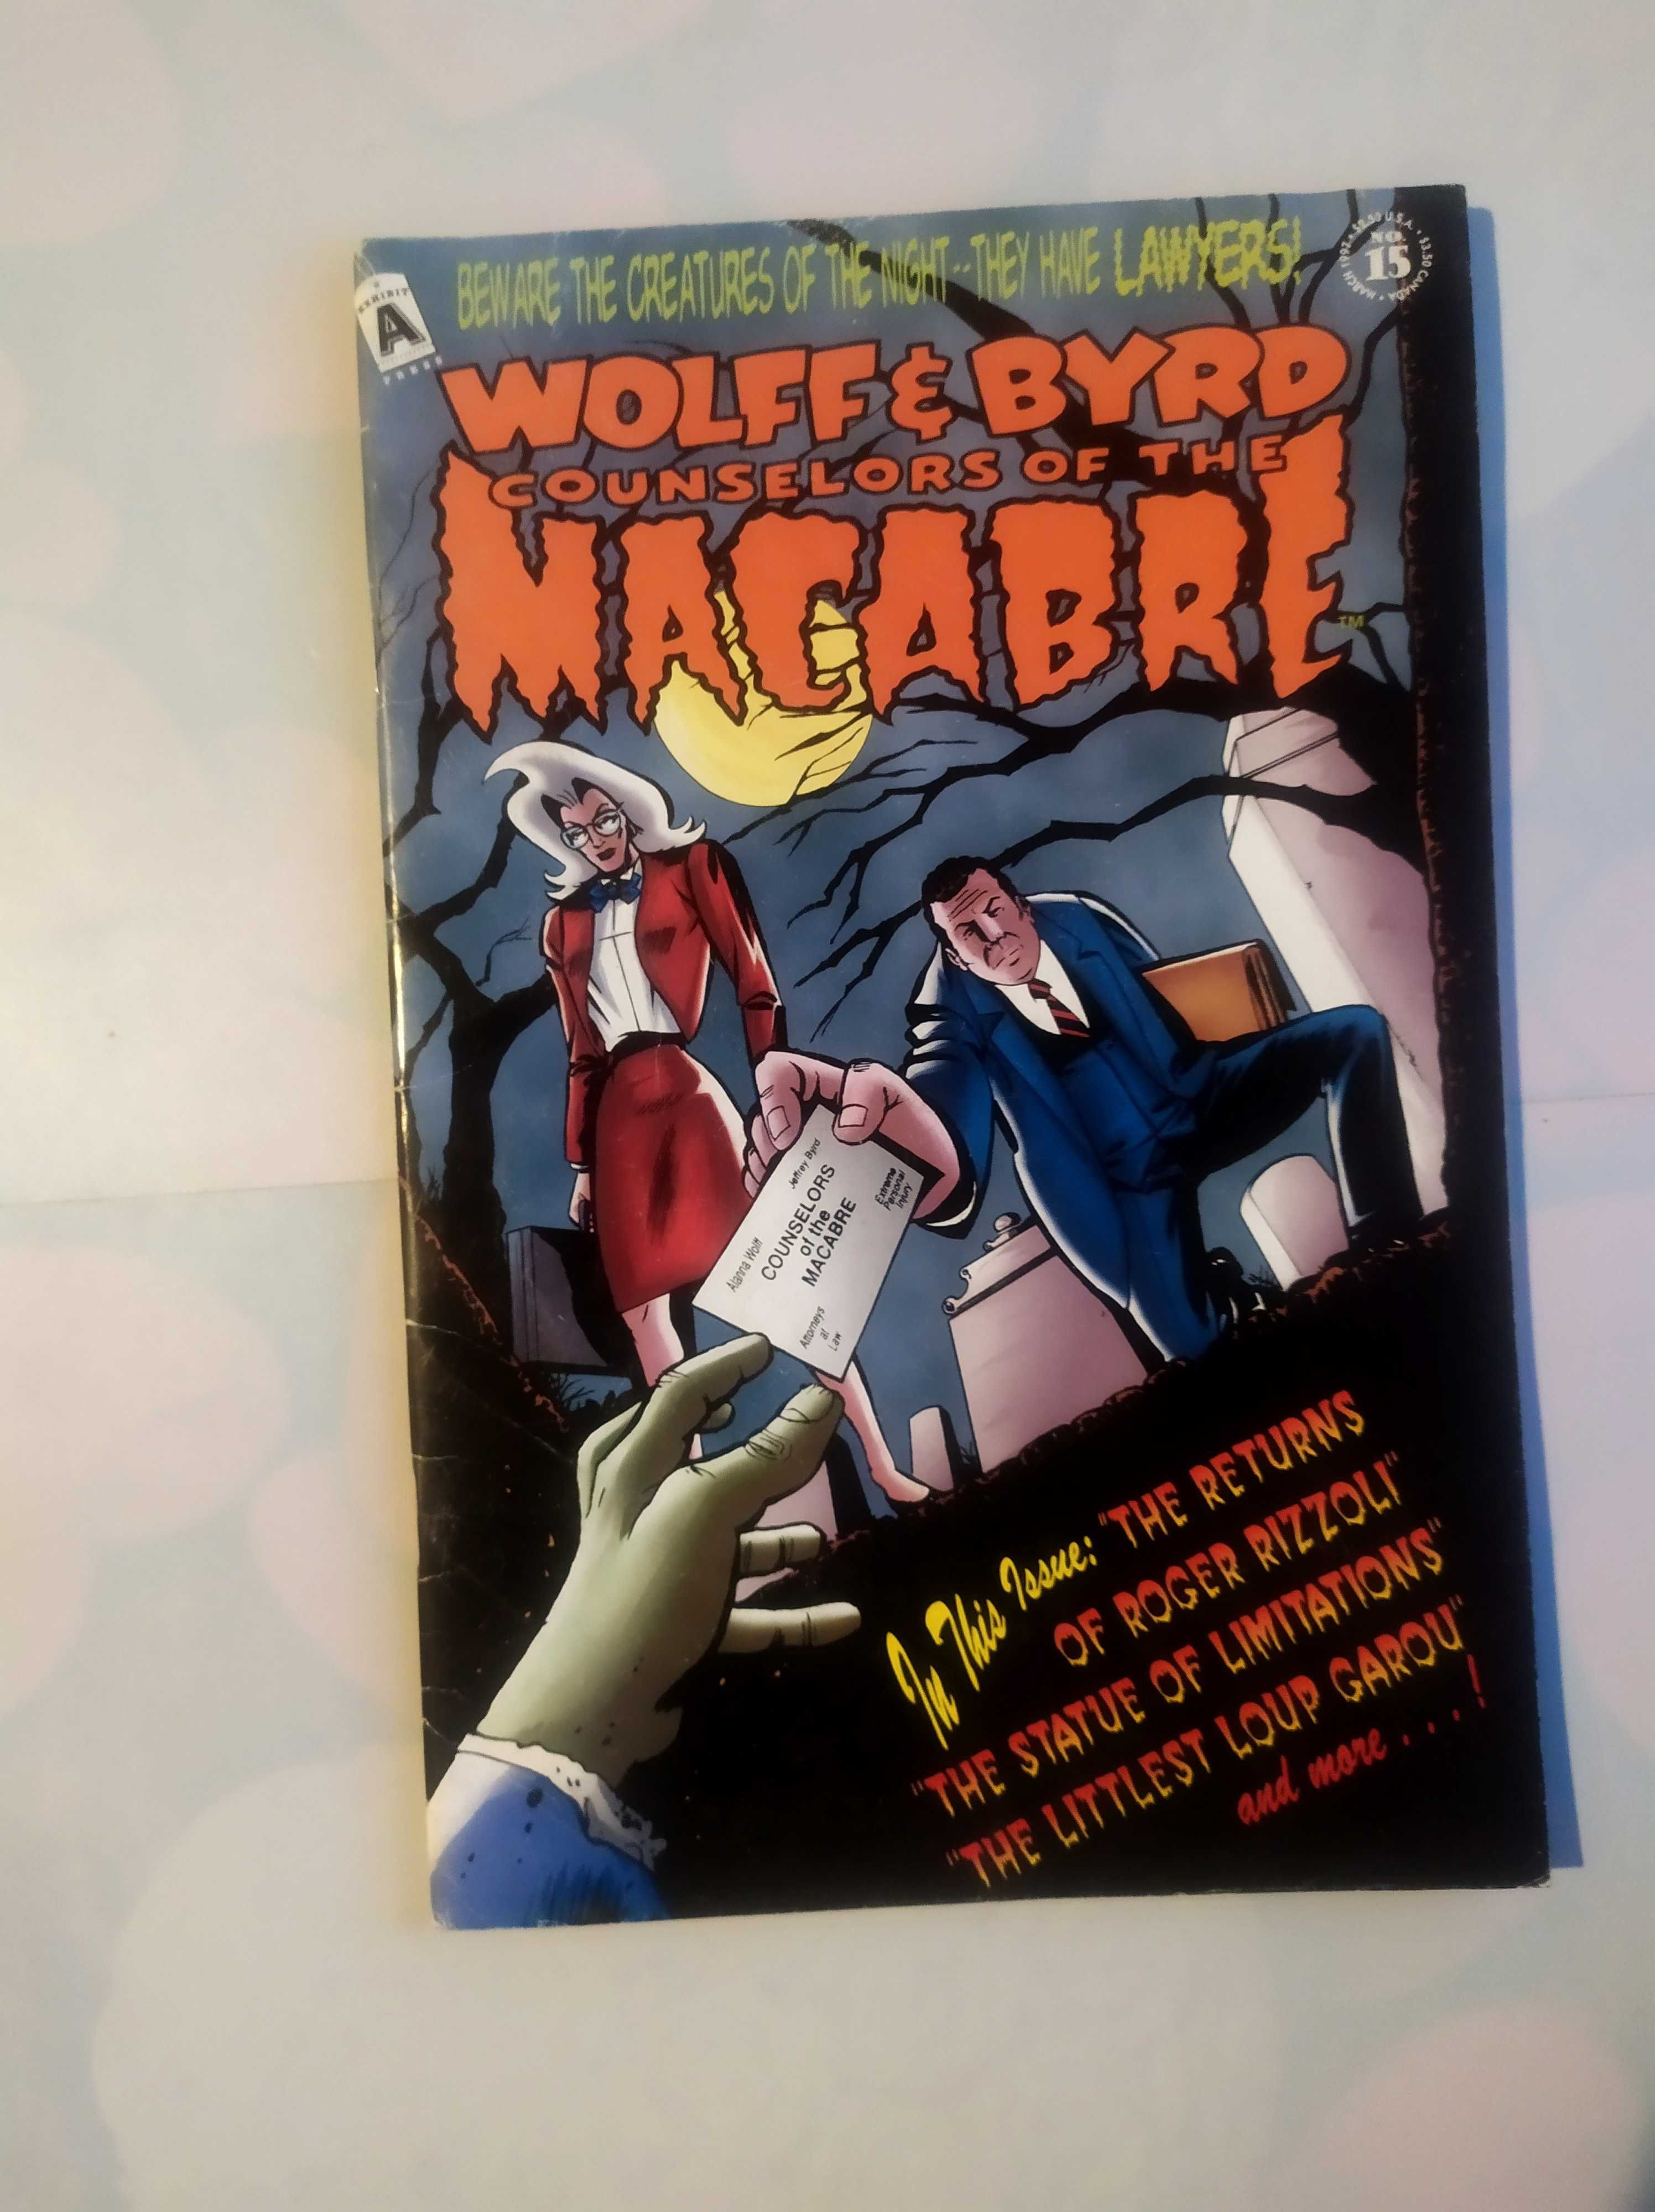 Комикс Wolff and Byrd Counselors of the Macabre № 11-15 (1996)